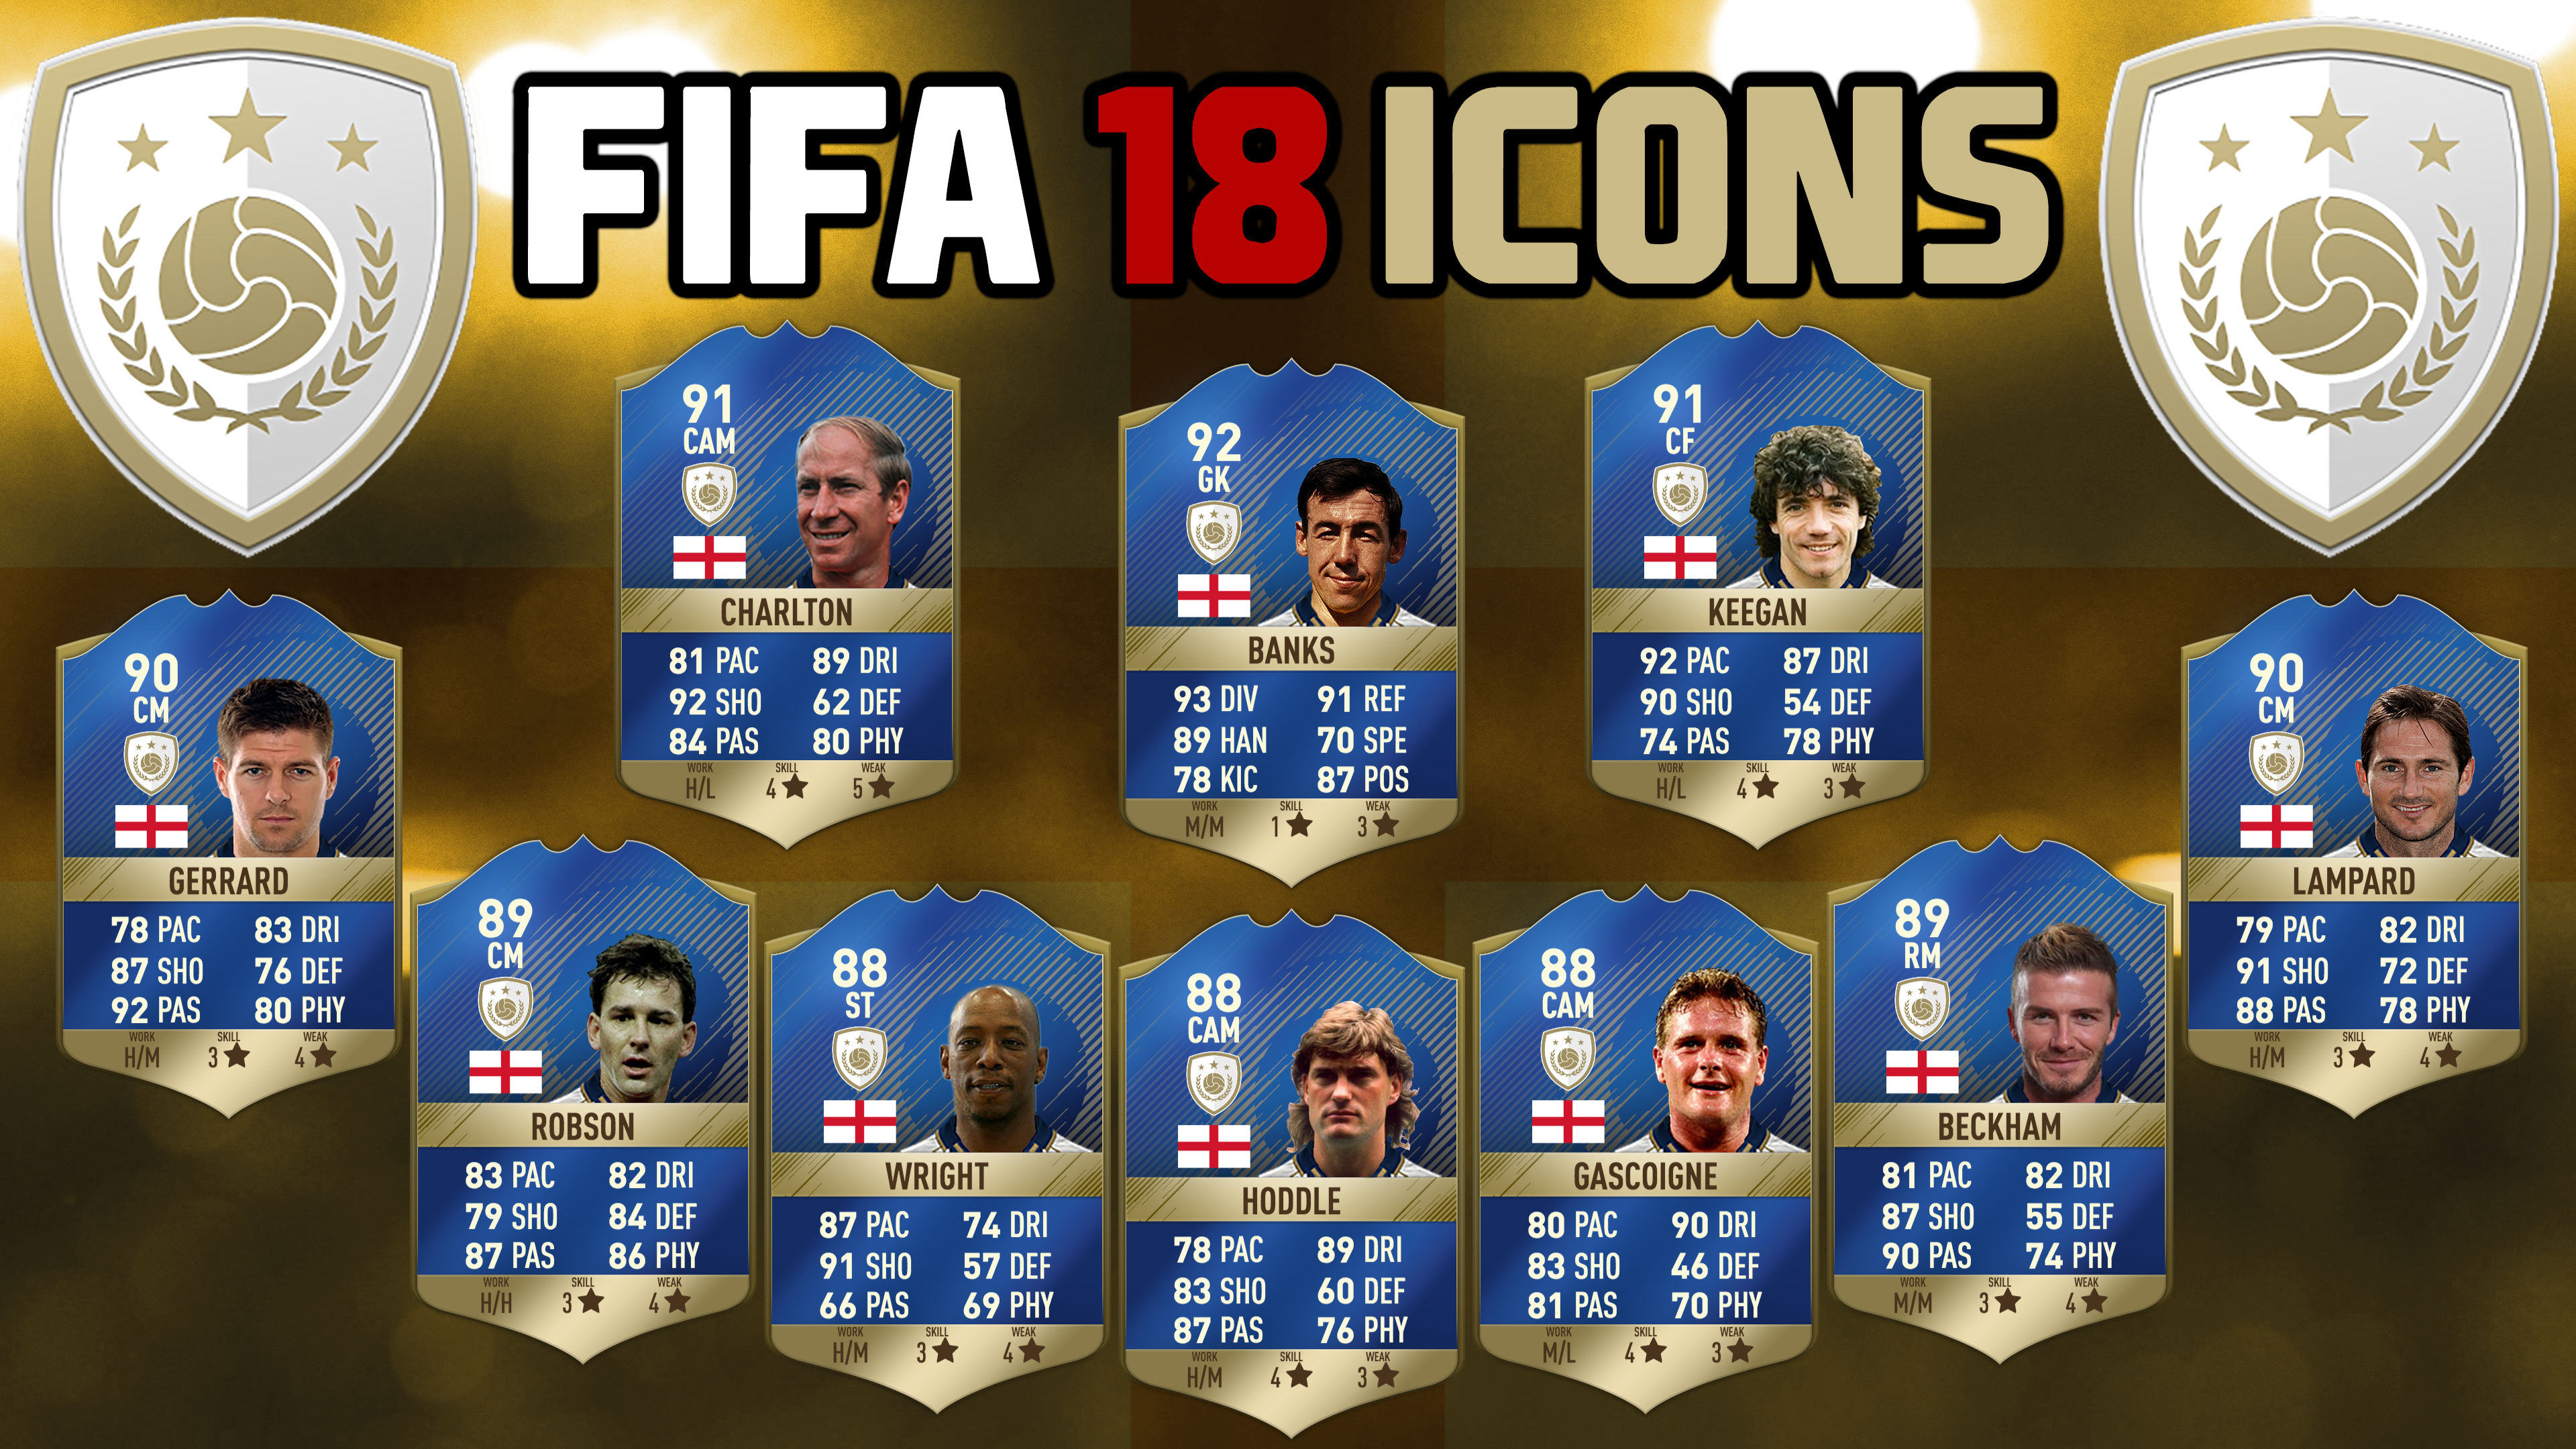 614 Fifa icon images at